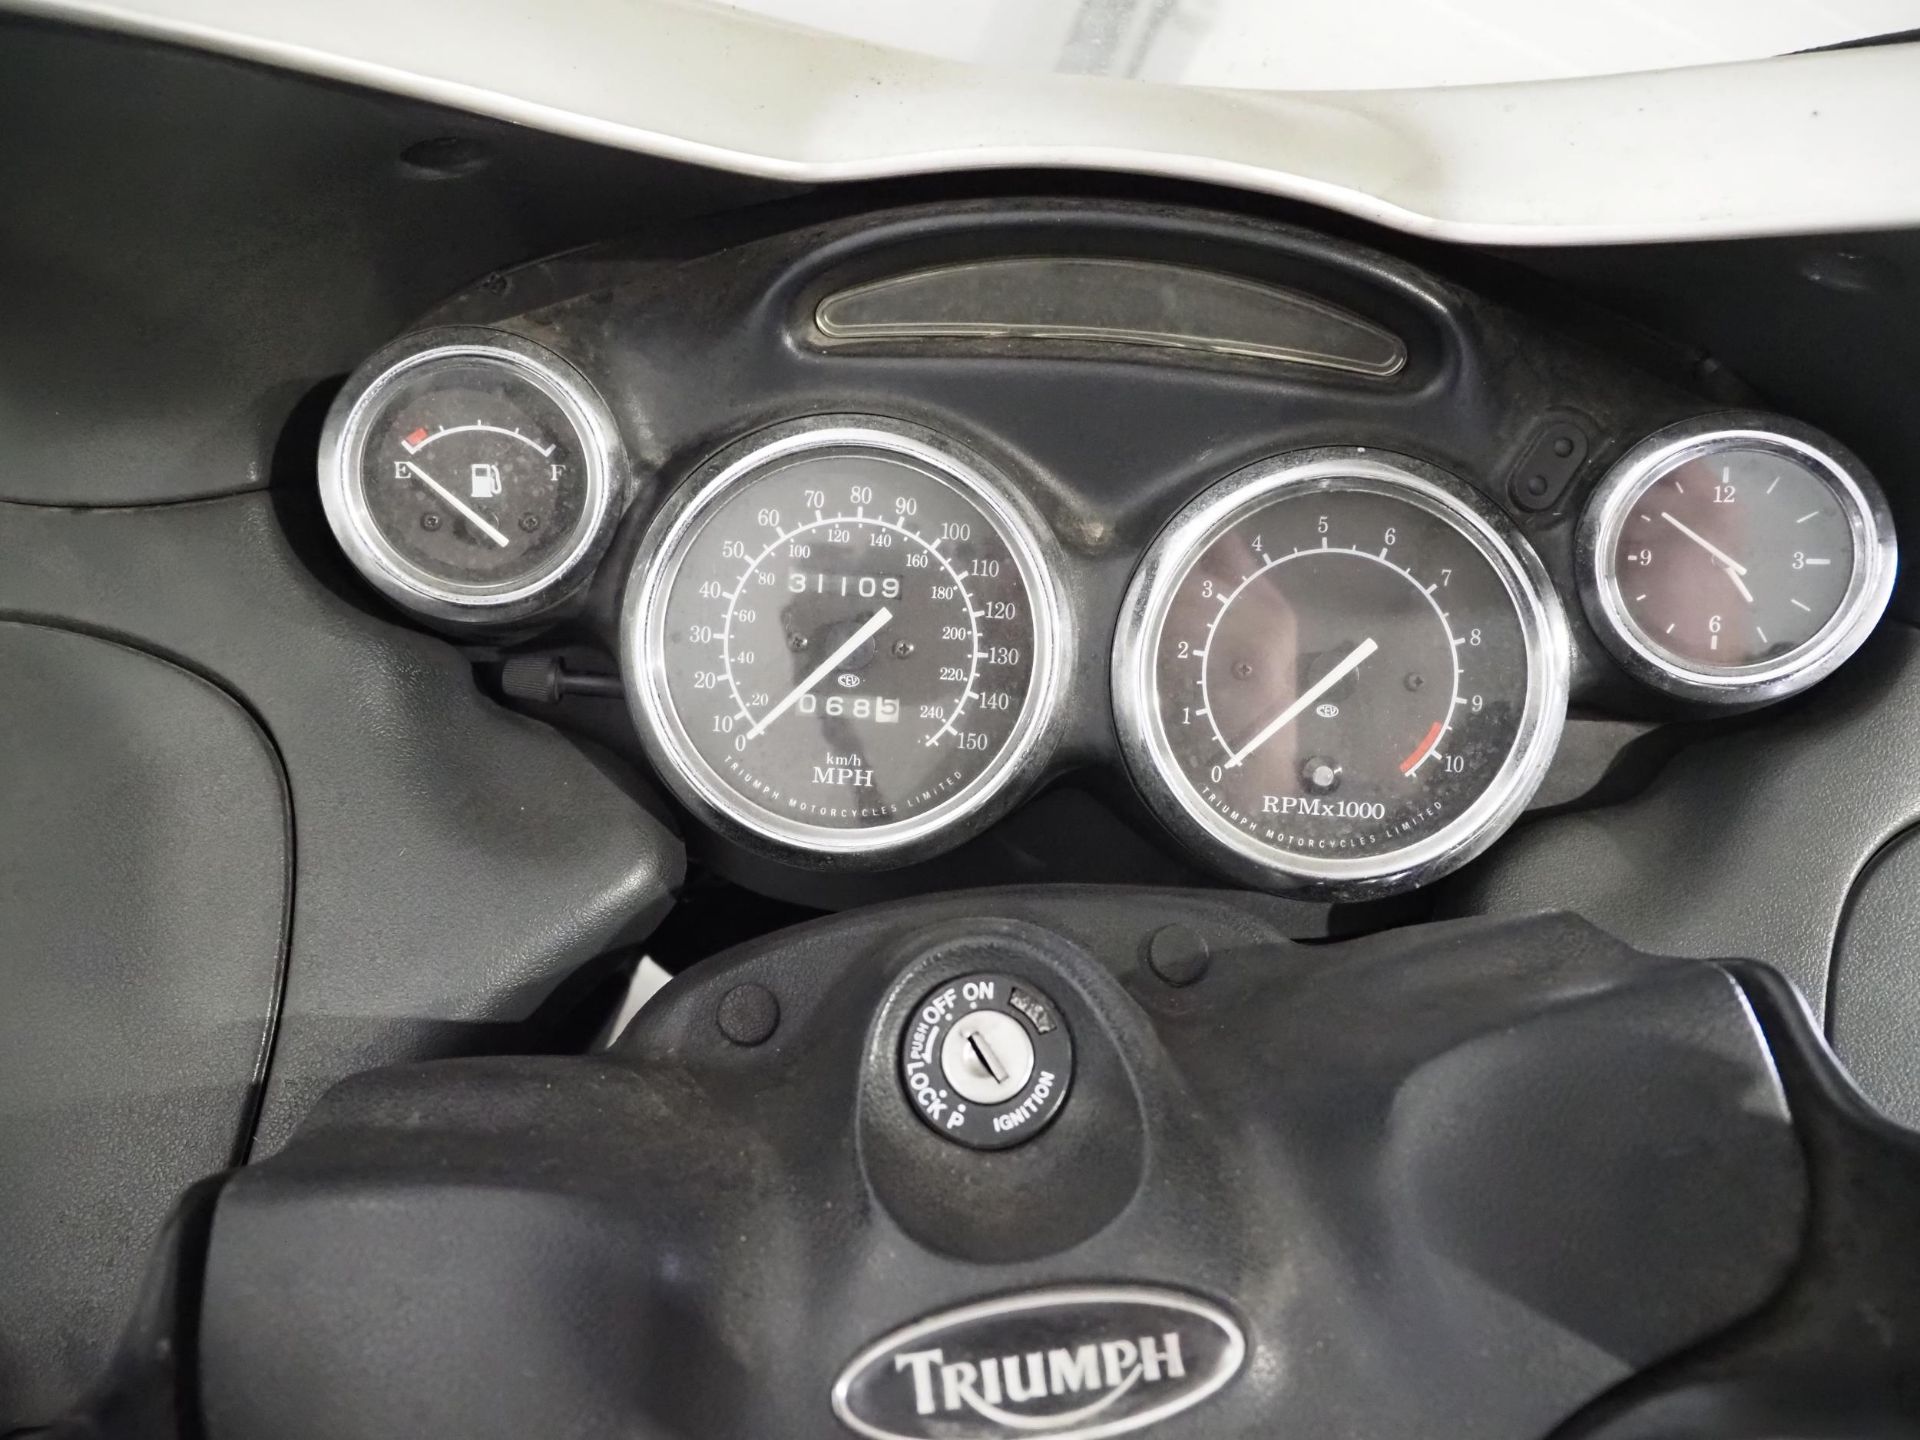 Triumph T309 Trophy motorcycle. 885cc. 1997. Property of a deceased estate. From the late - Image 5 of 6